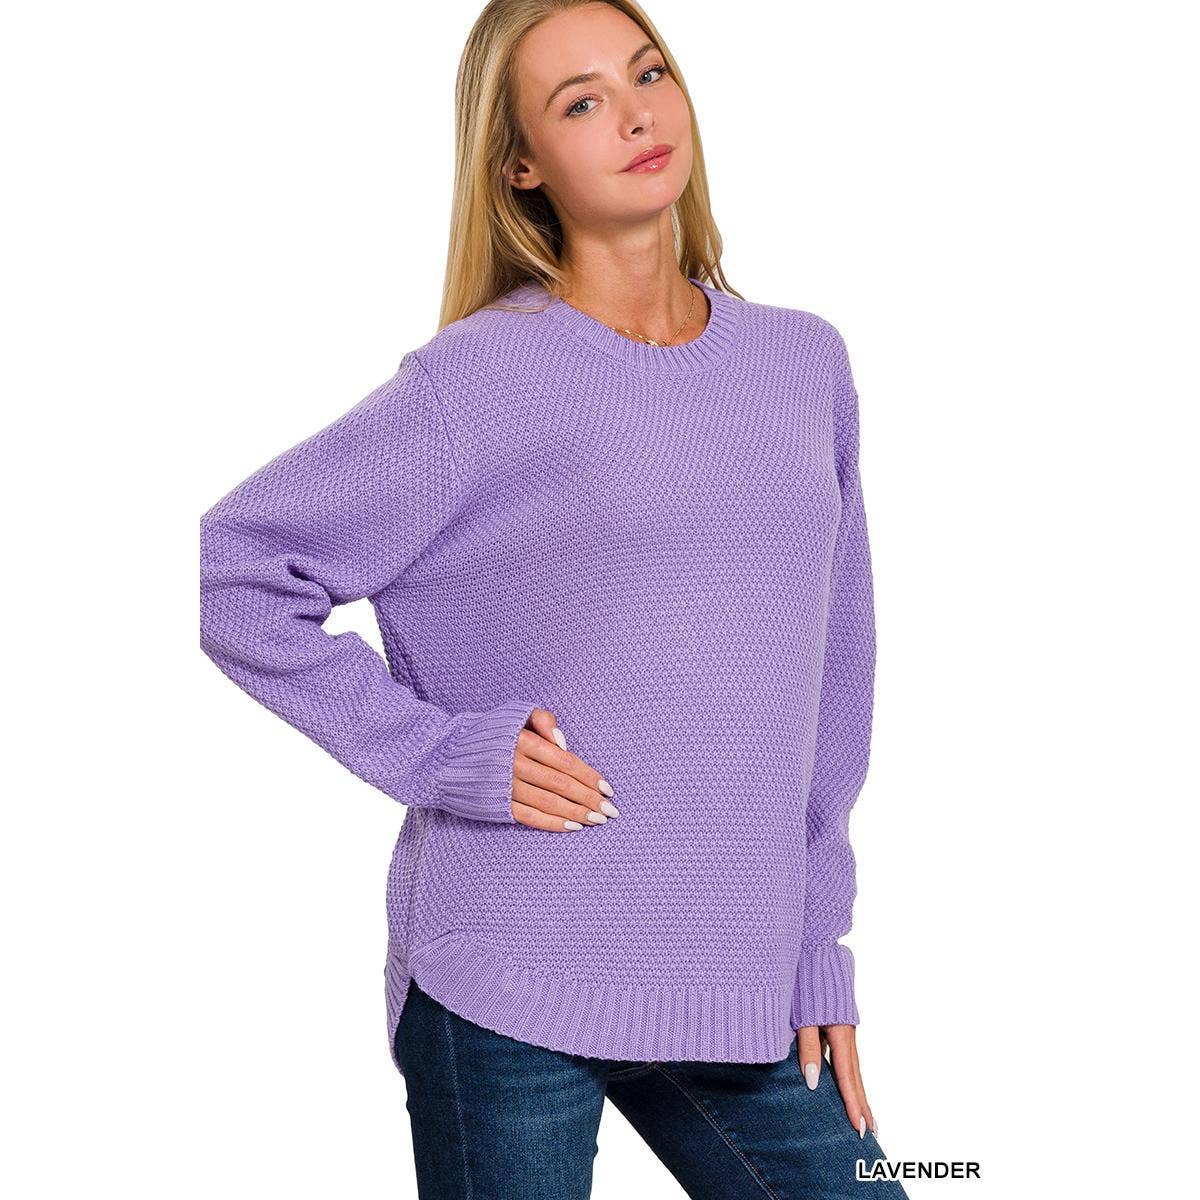 Basic Sweater in Lavender